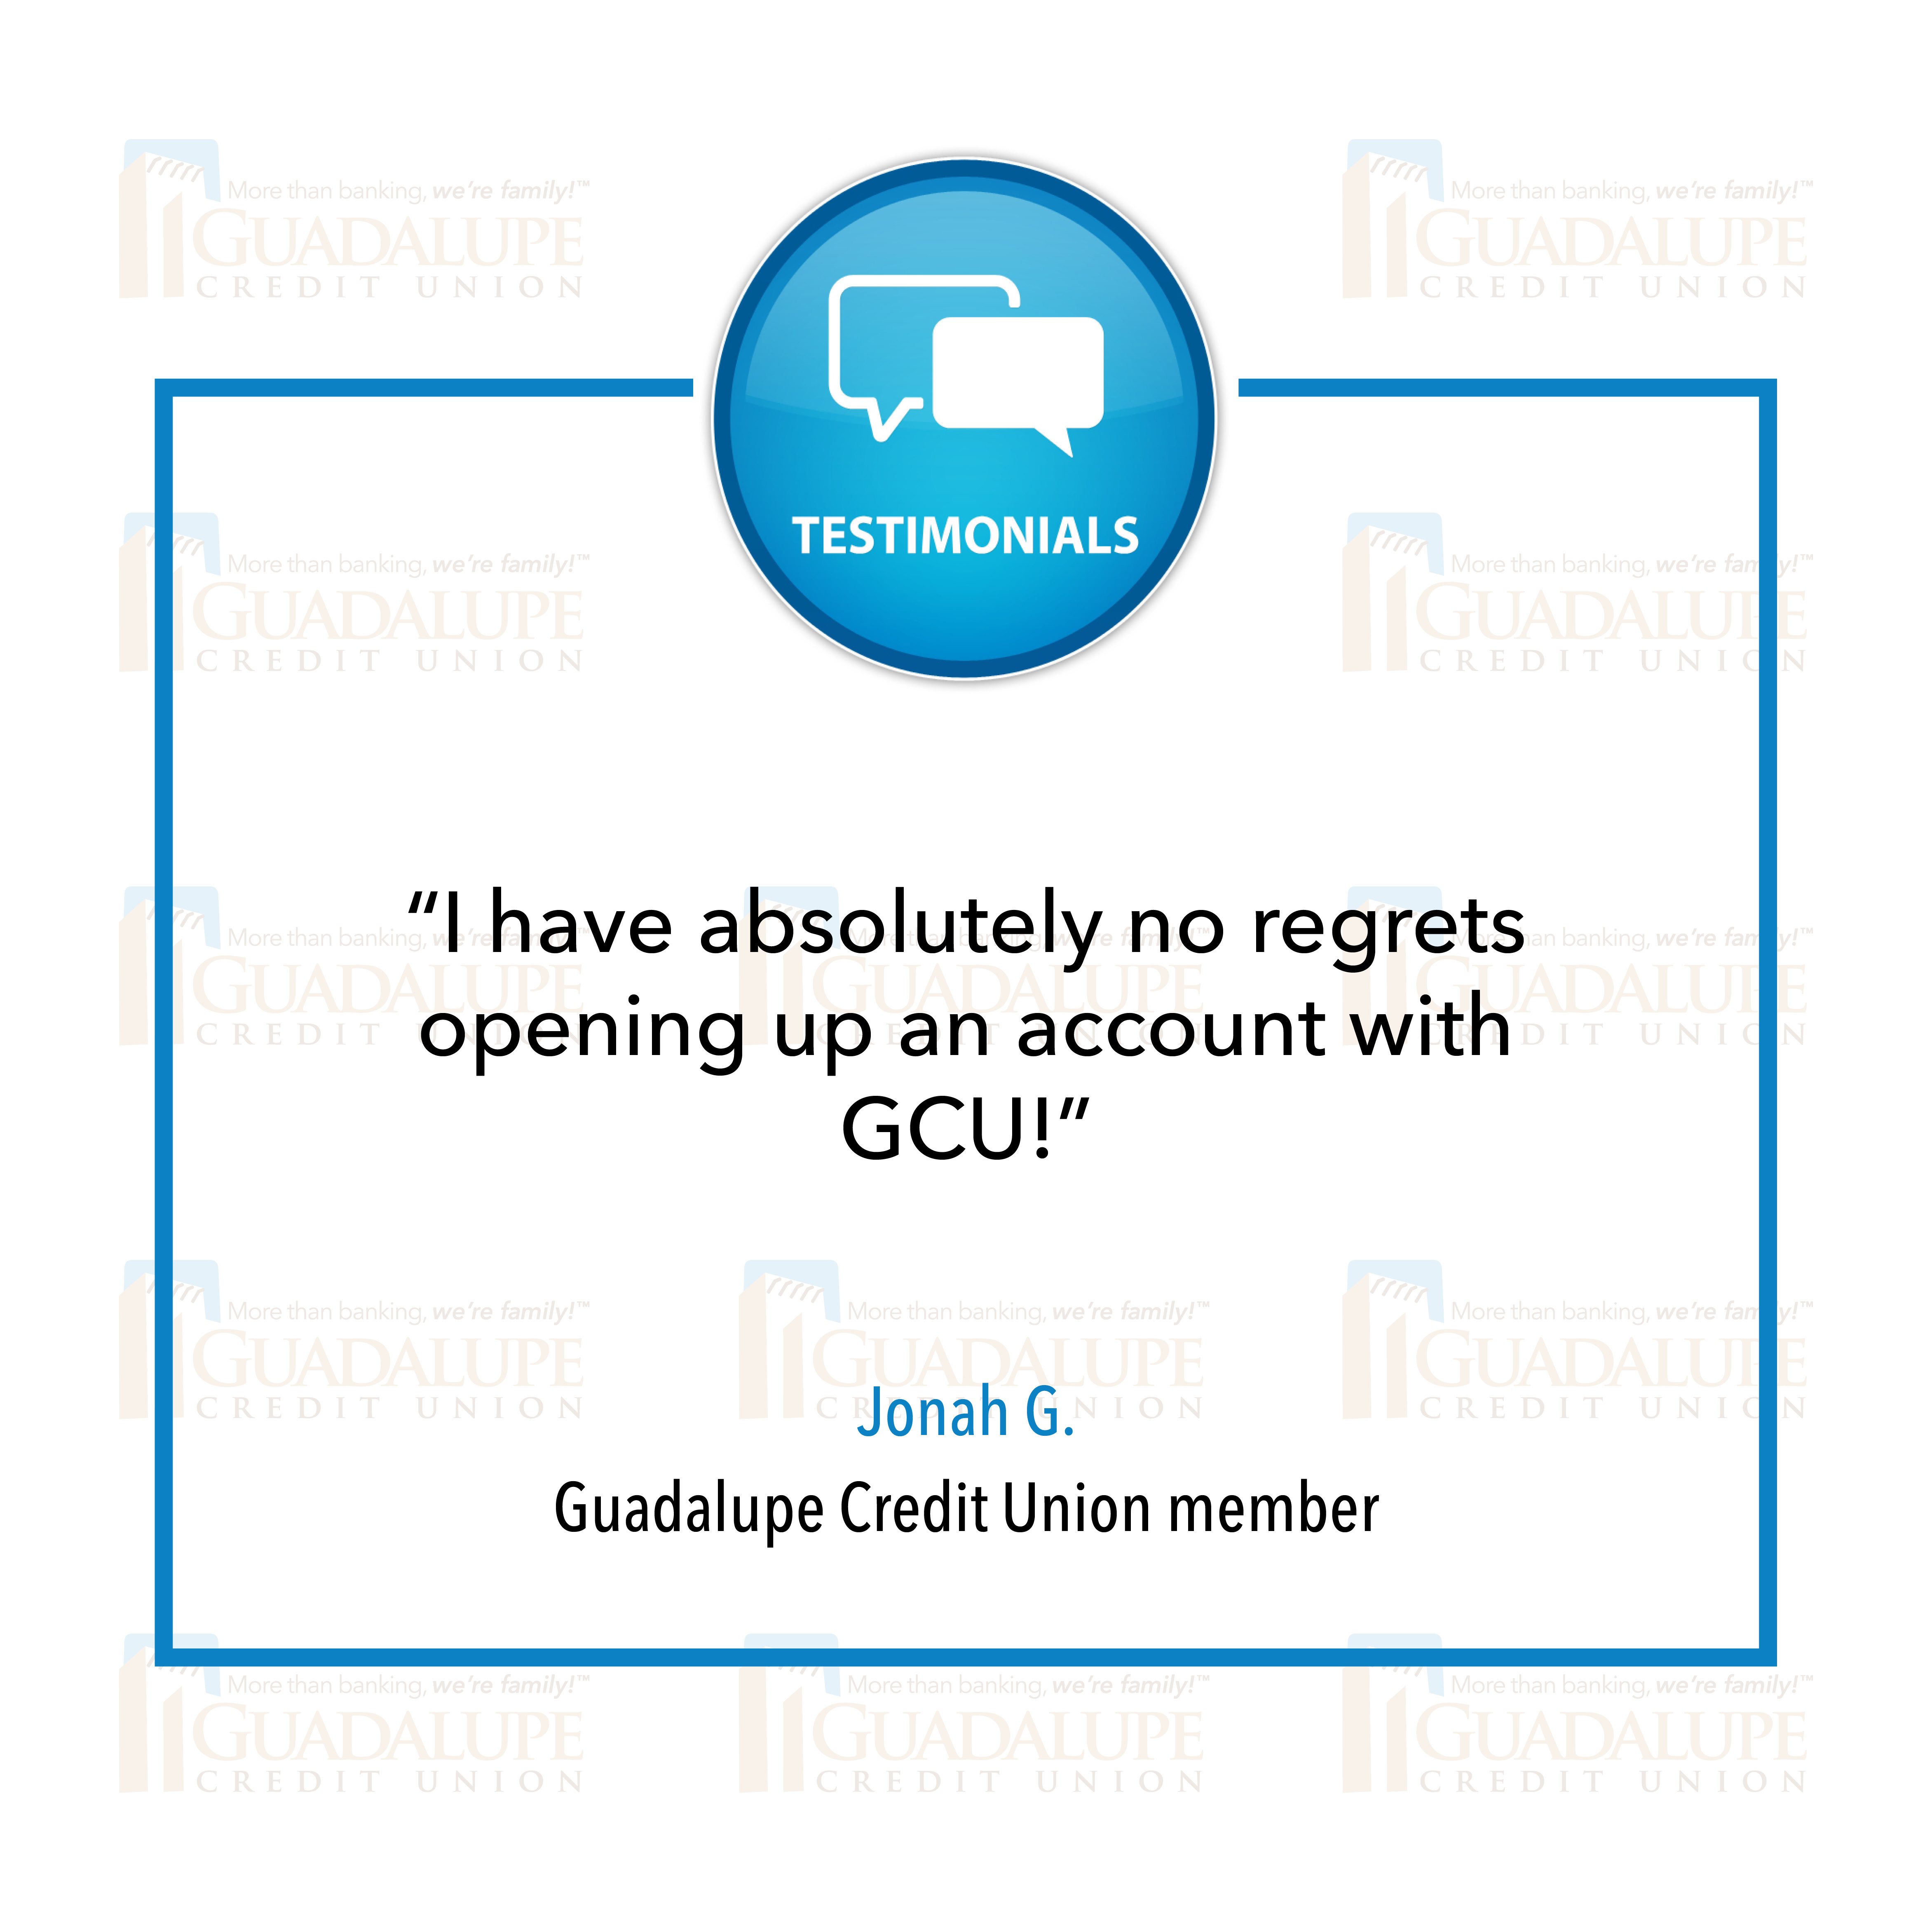 GCU Testimonial - "I have absolutely no regrets opening up an account with GCU!"